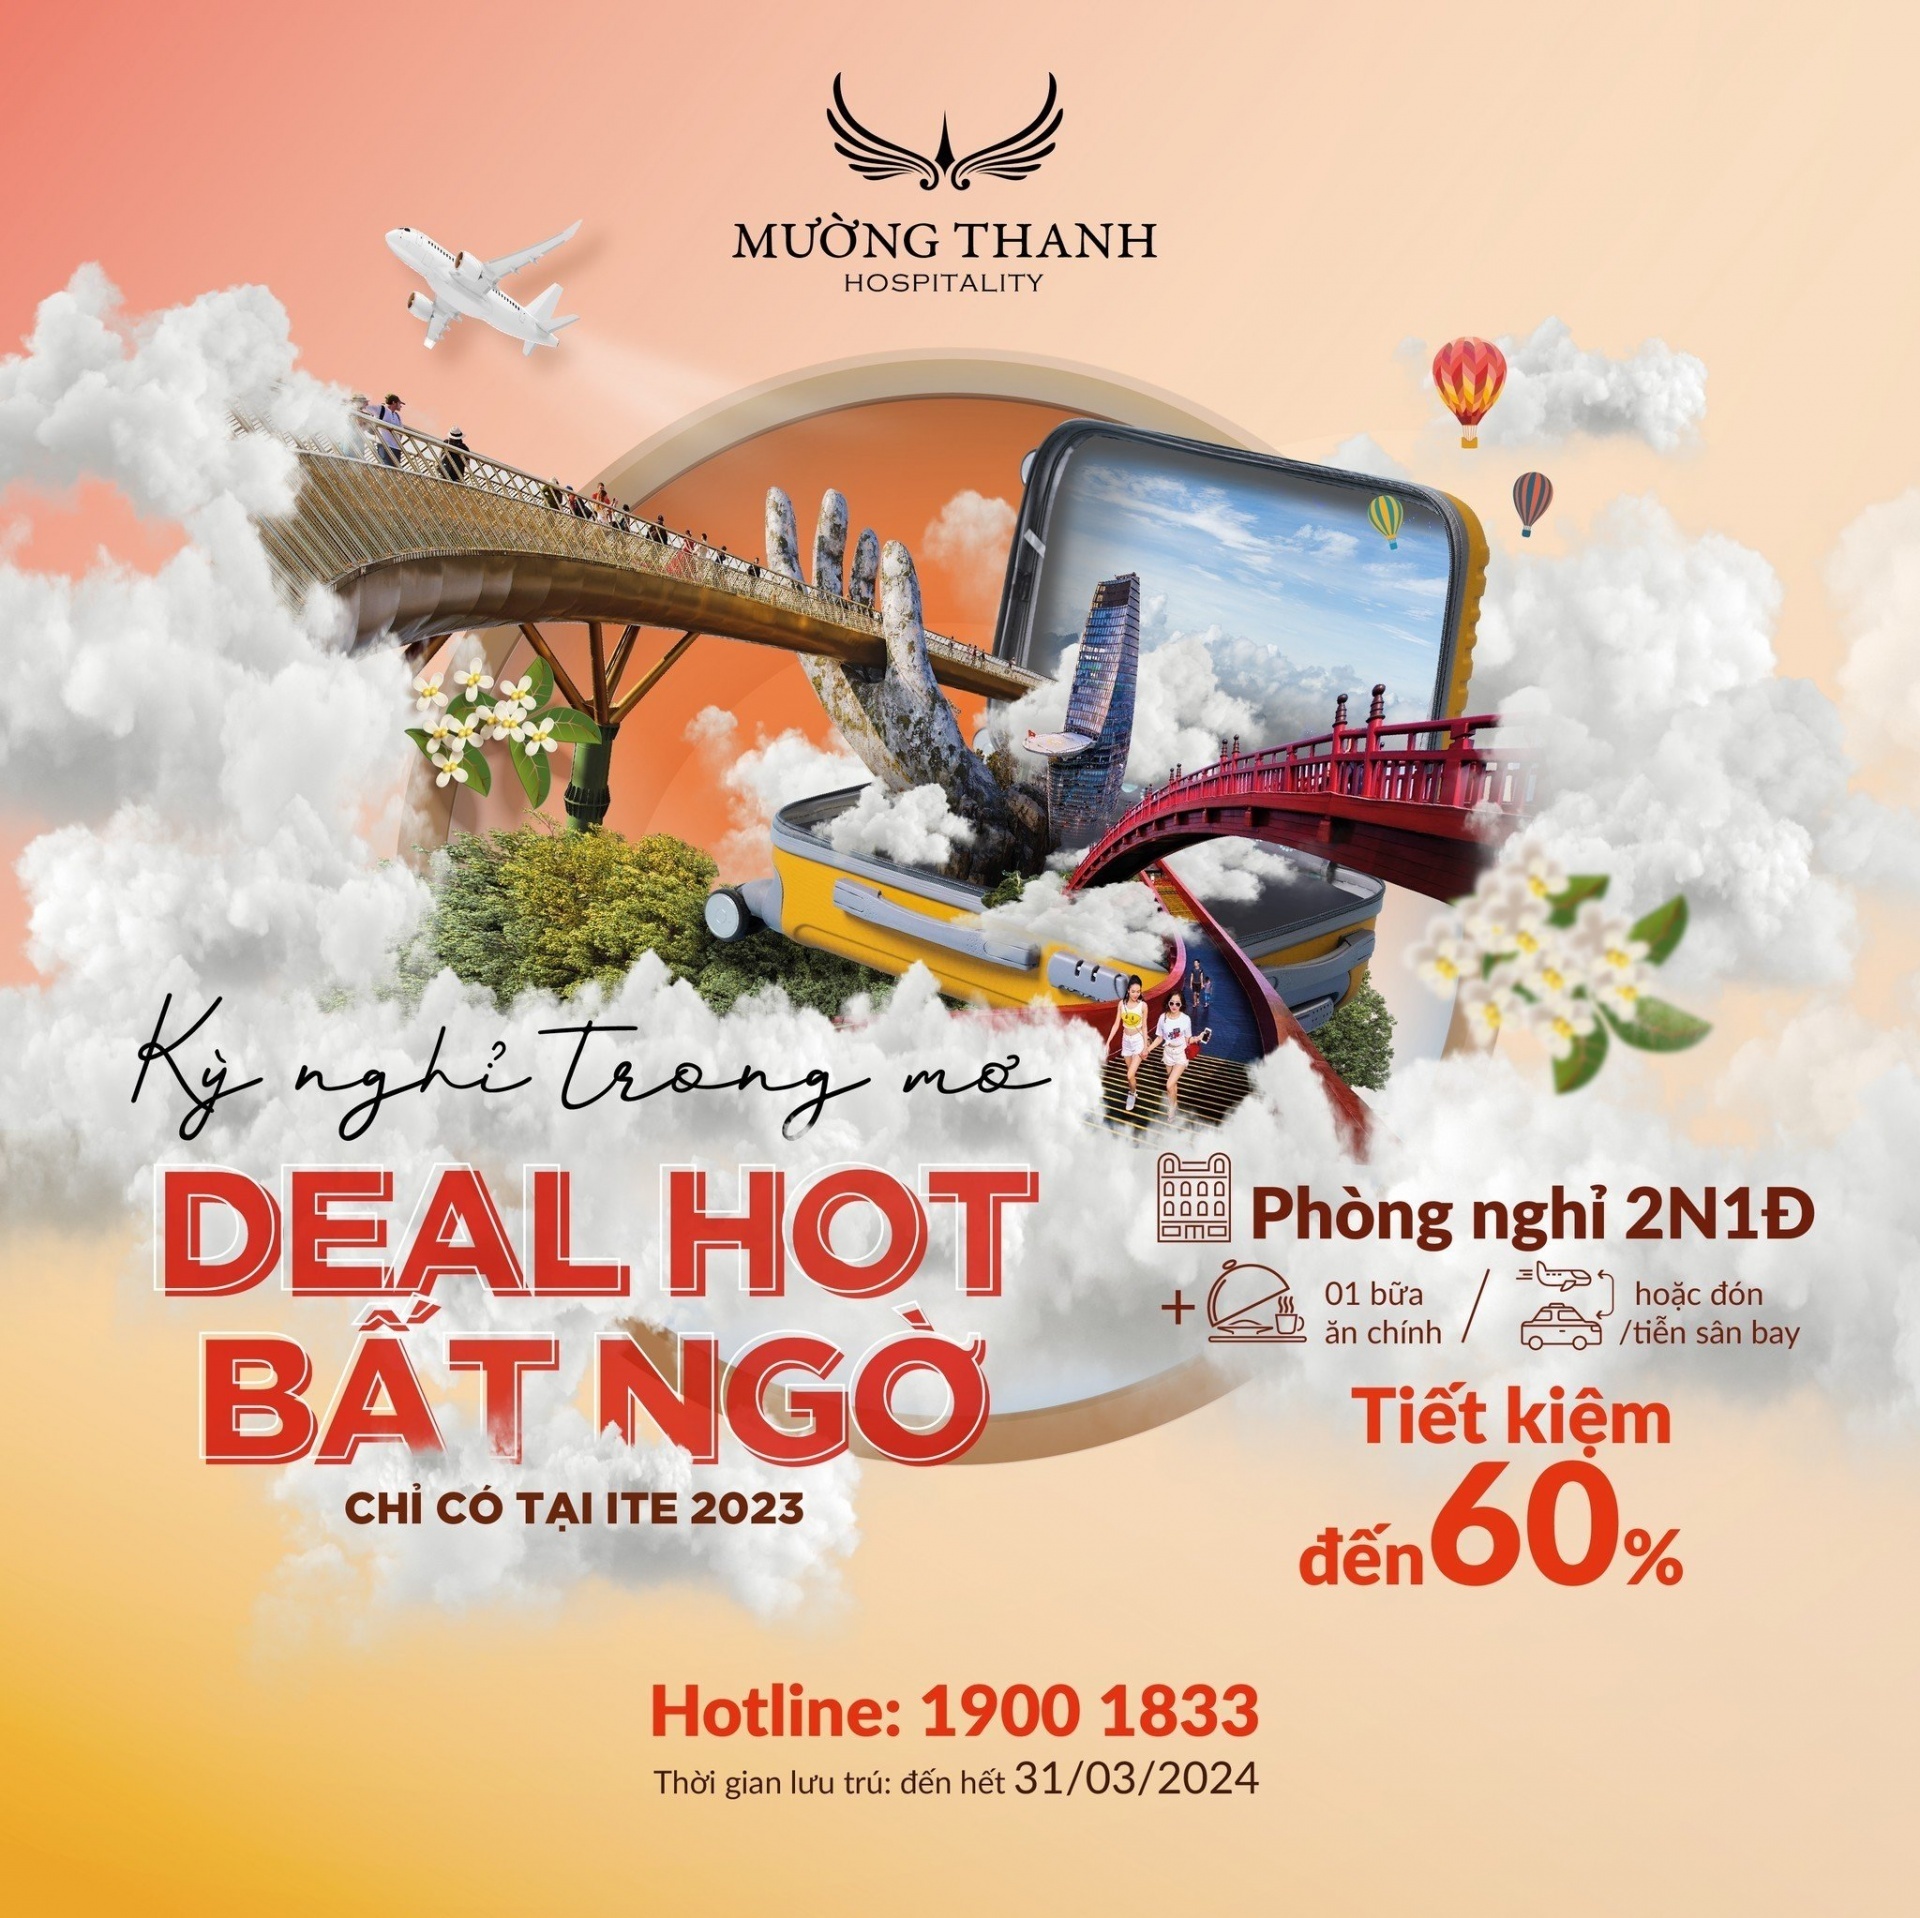 Muong Thanh to launch promotions at upcoming travel expo